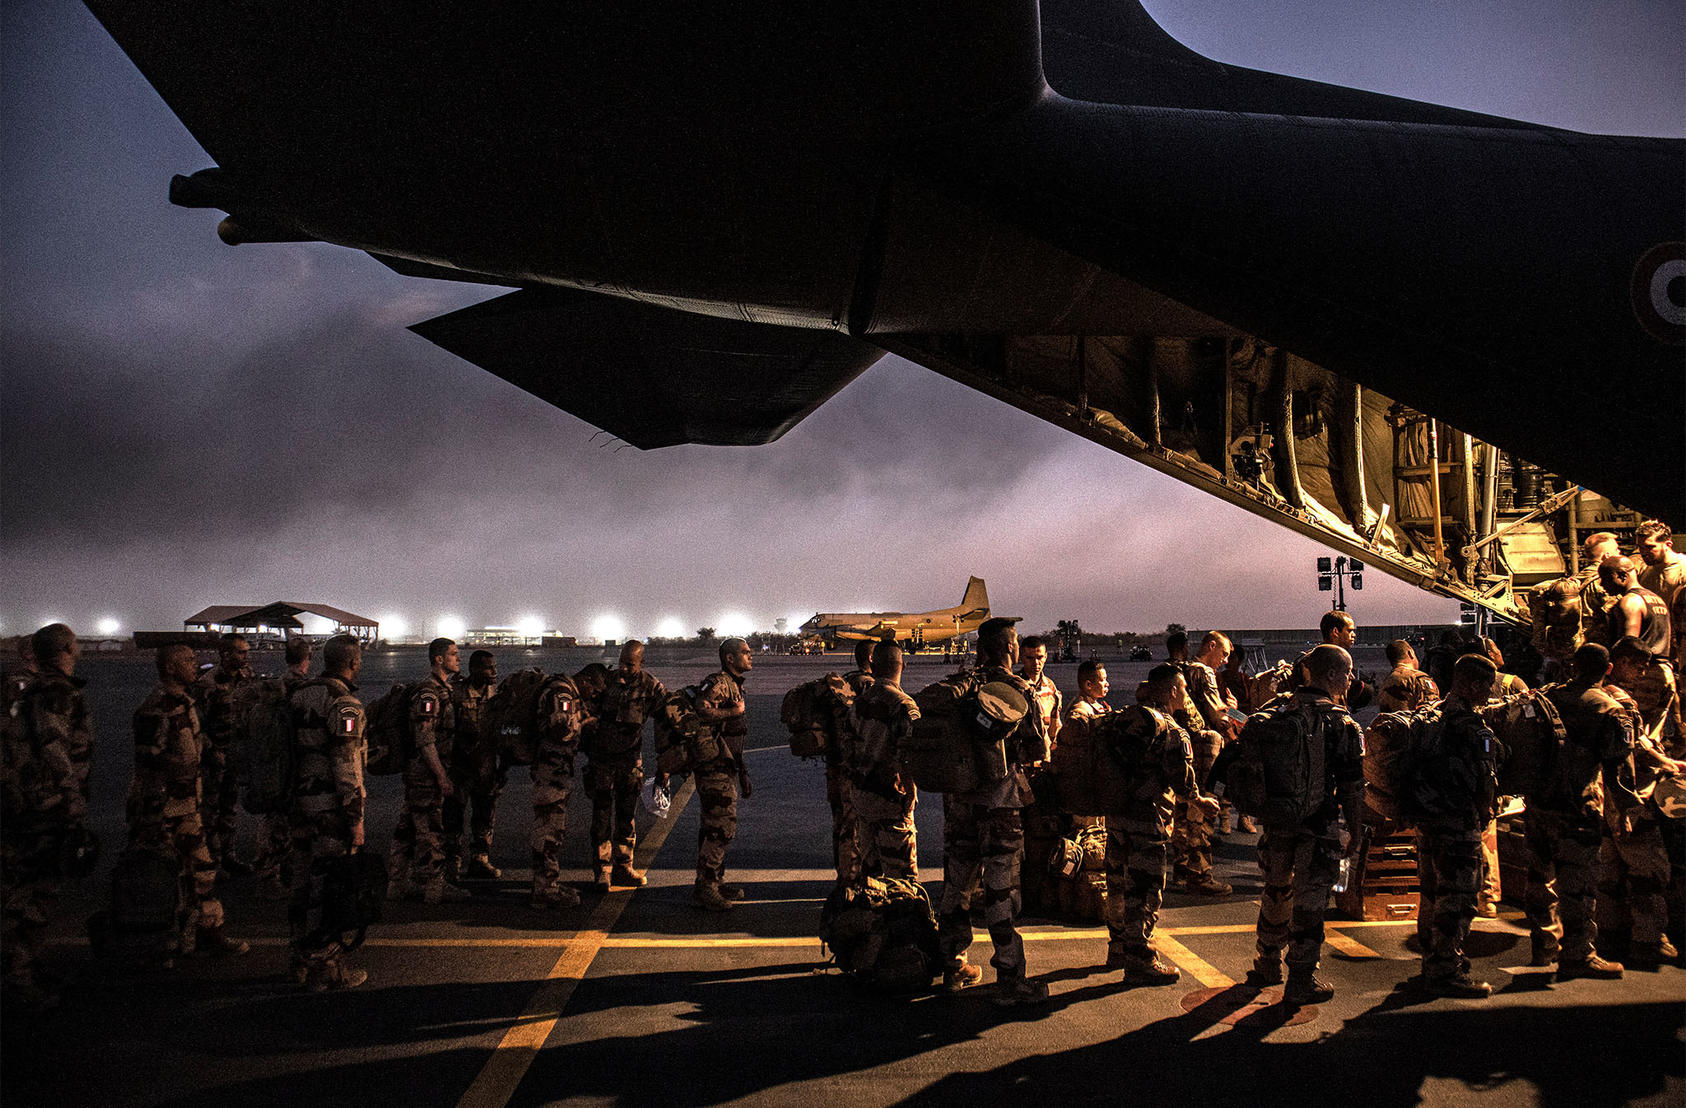 French soldiers board a C-130 transport plane in Niger’s capital Niamey to deploy to the Liptako-Gourma zone in northeastern Mali in February 2020. (Finbarr O'Reilly/The New York Times)